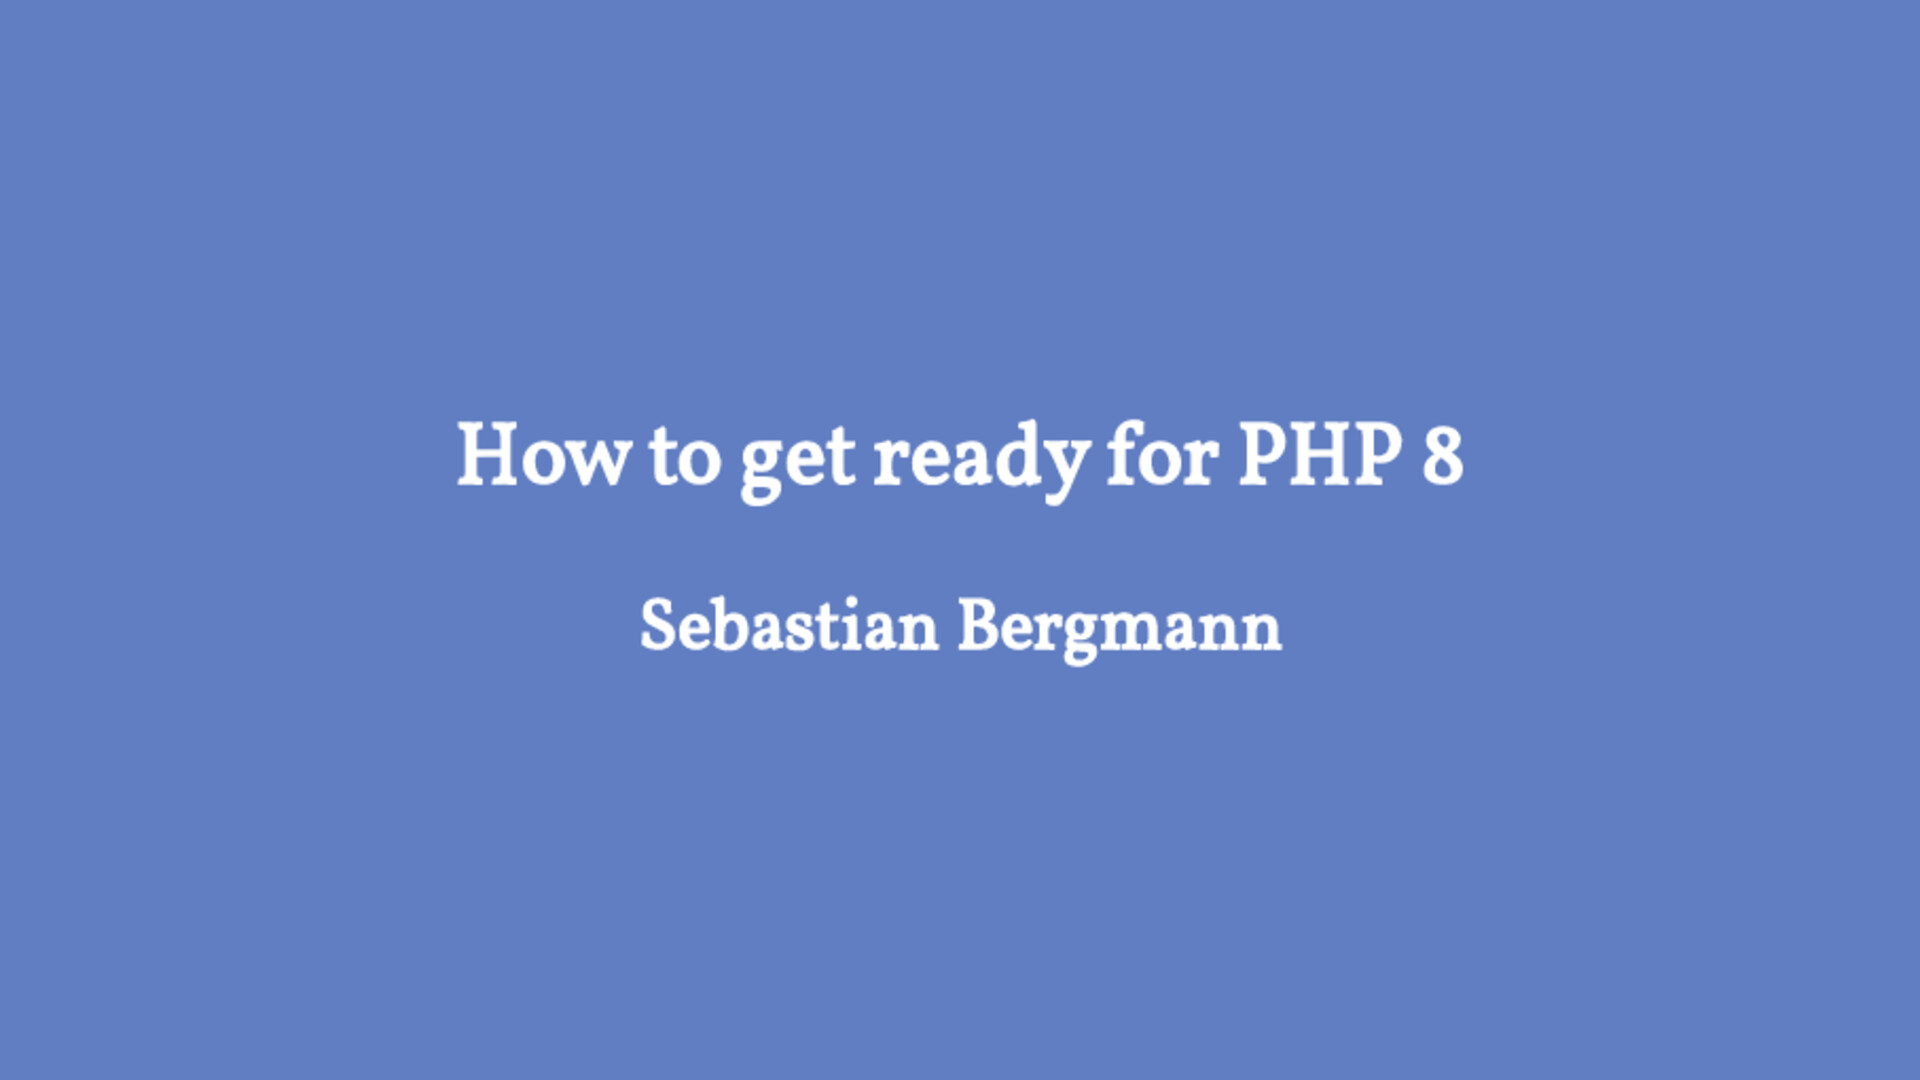 How to get ready for PHP 8